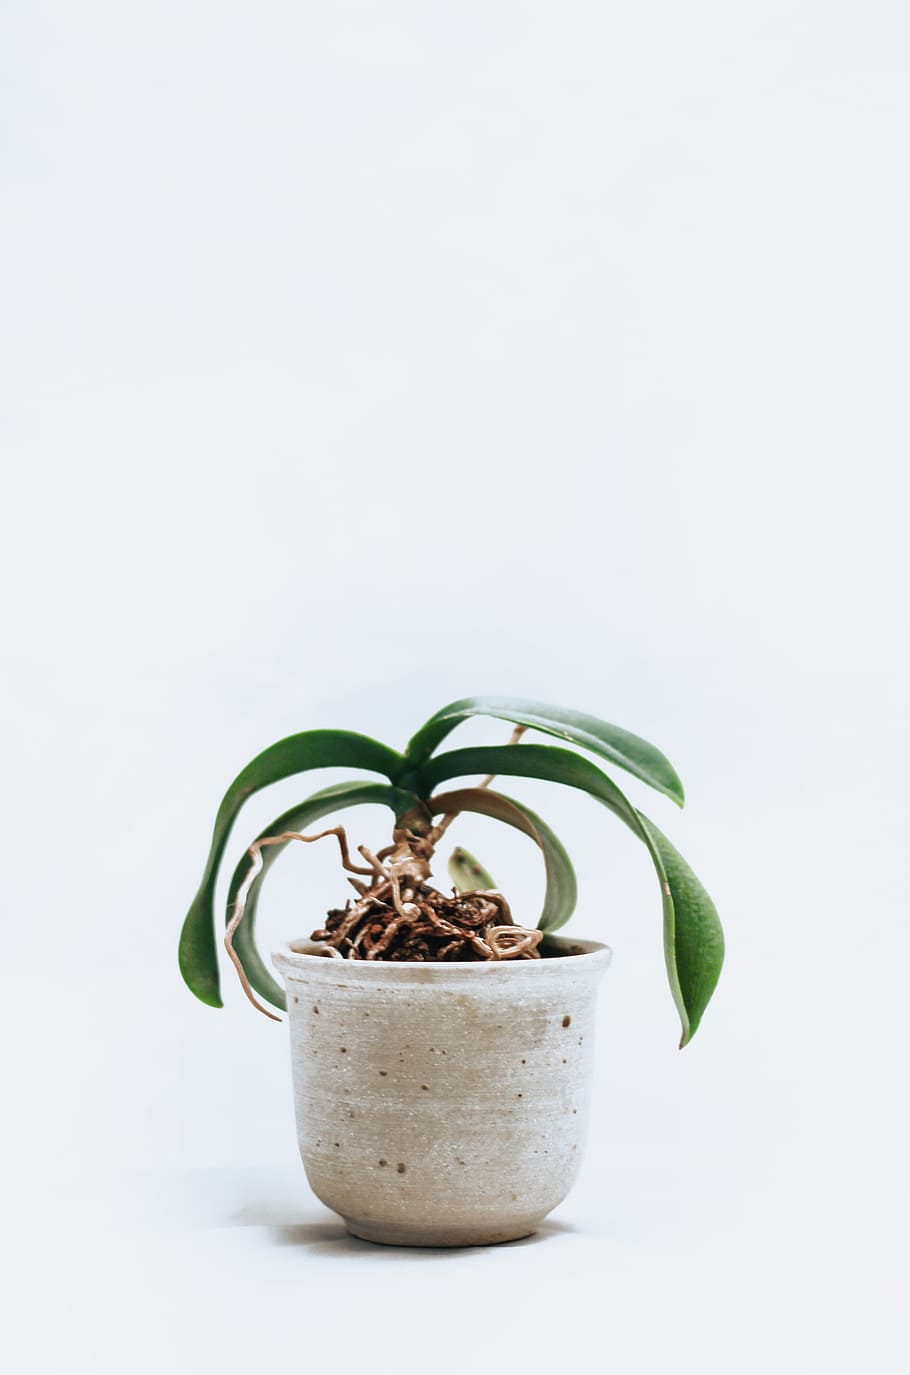 minimal, white, house plant, plant, leaves, grow, nature, house, home, interior design